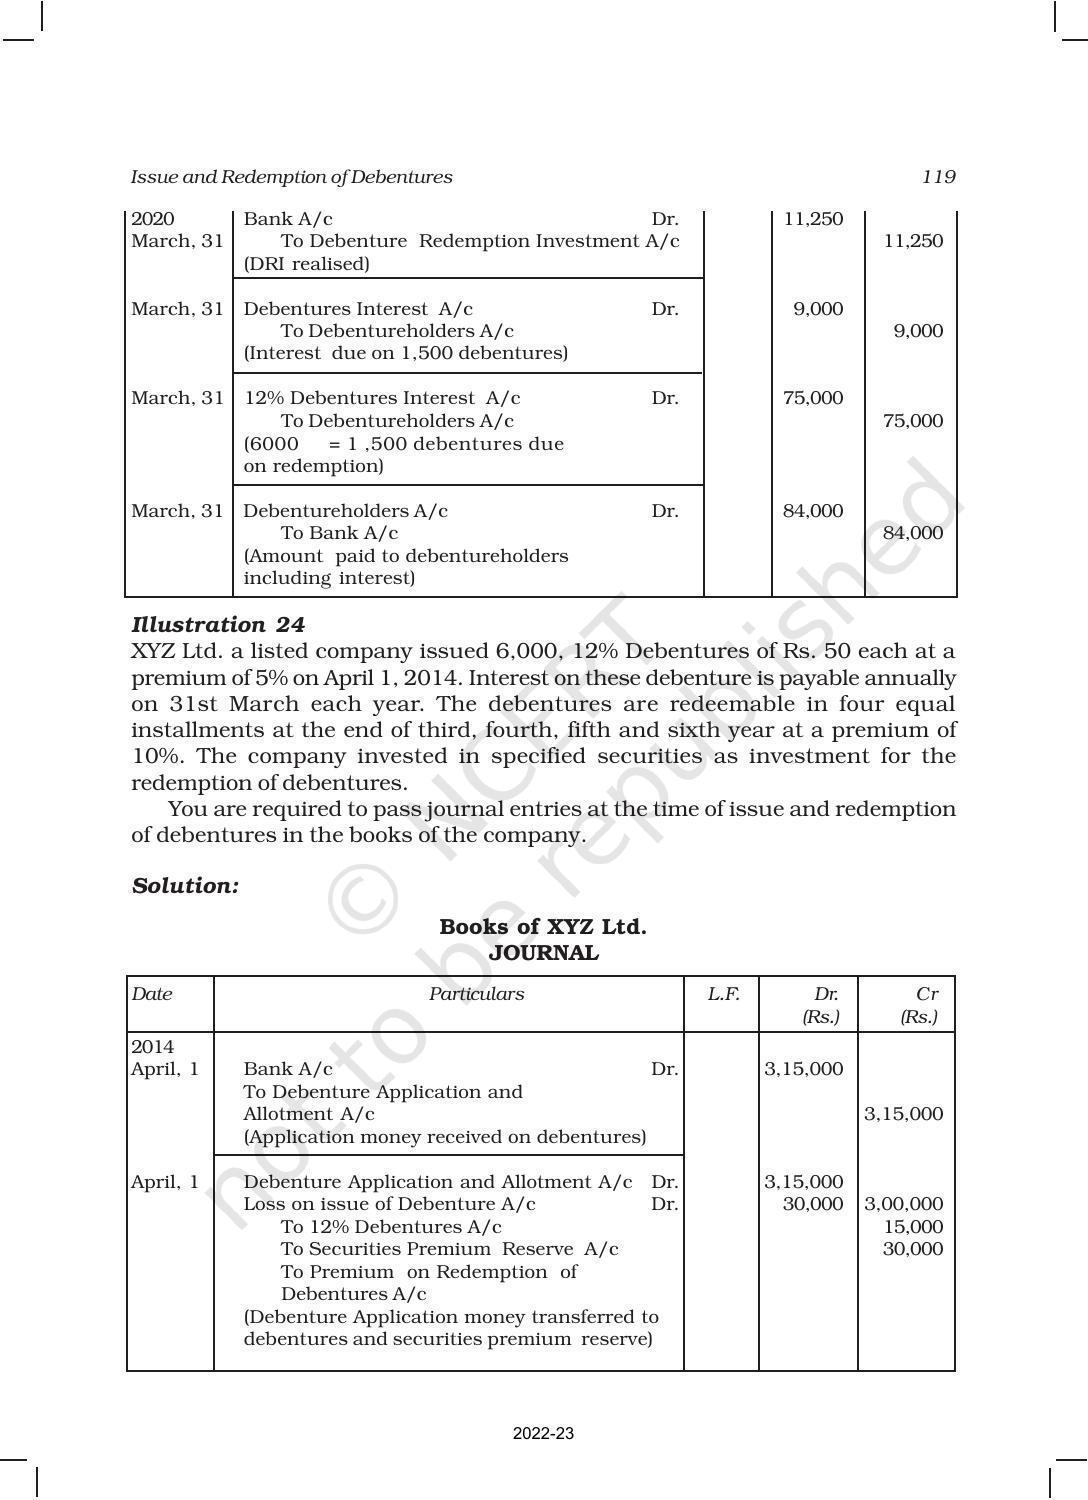 NCERT Book for Class 12 Accountancy Part II Chapter 1 Issue and Redemption of Debentures - Page 45